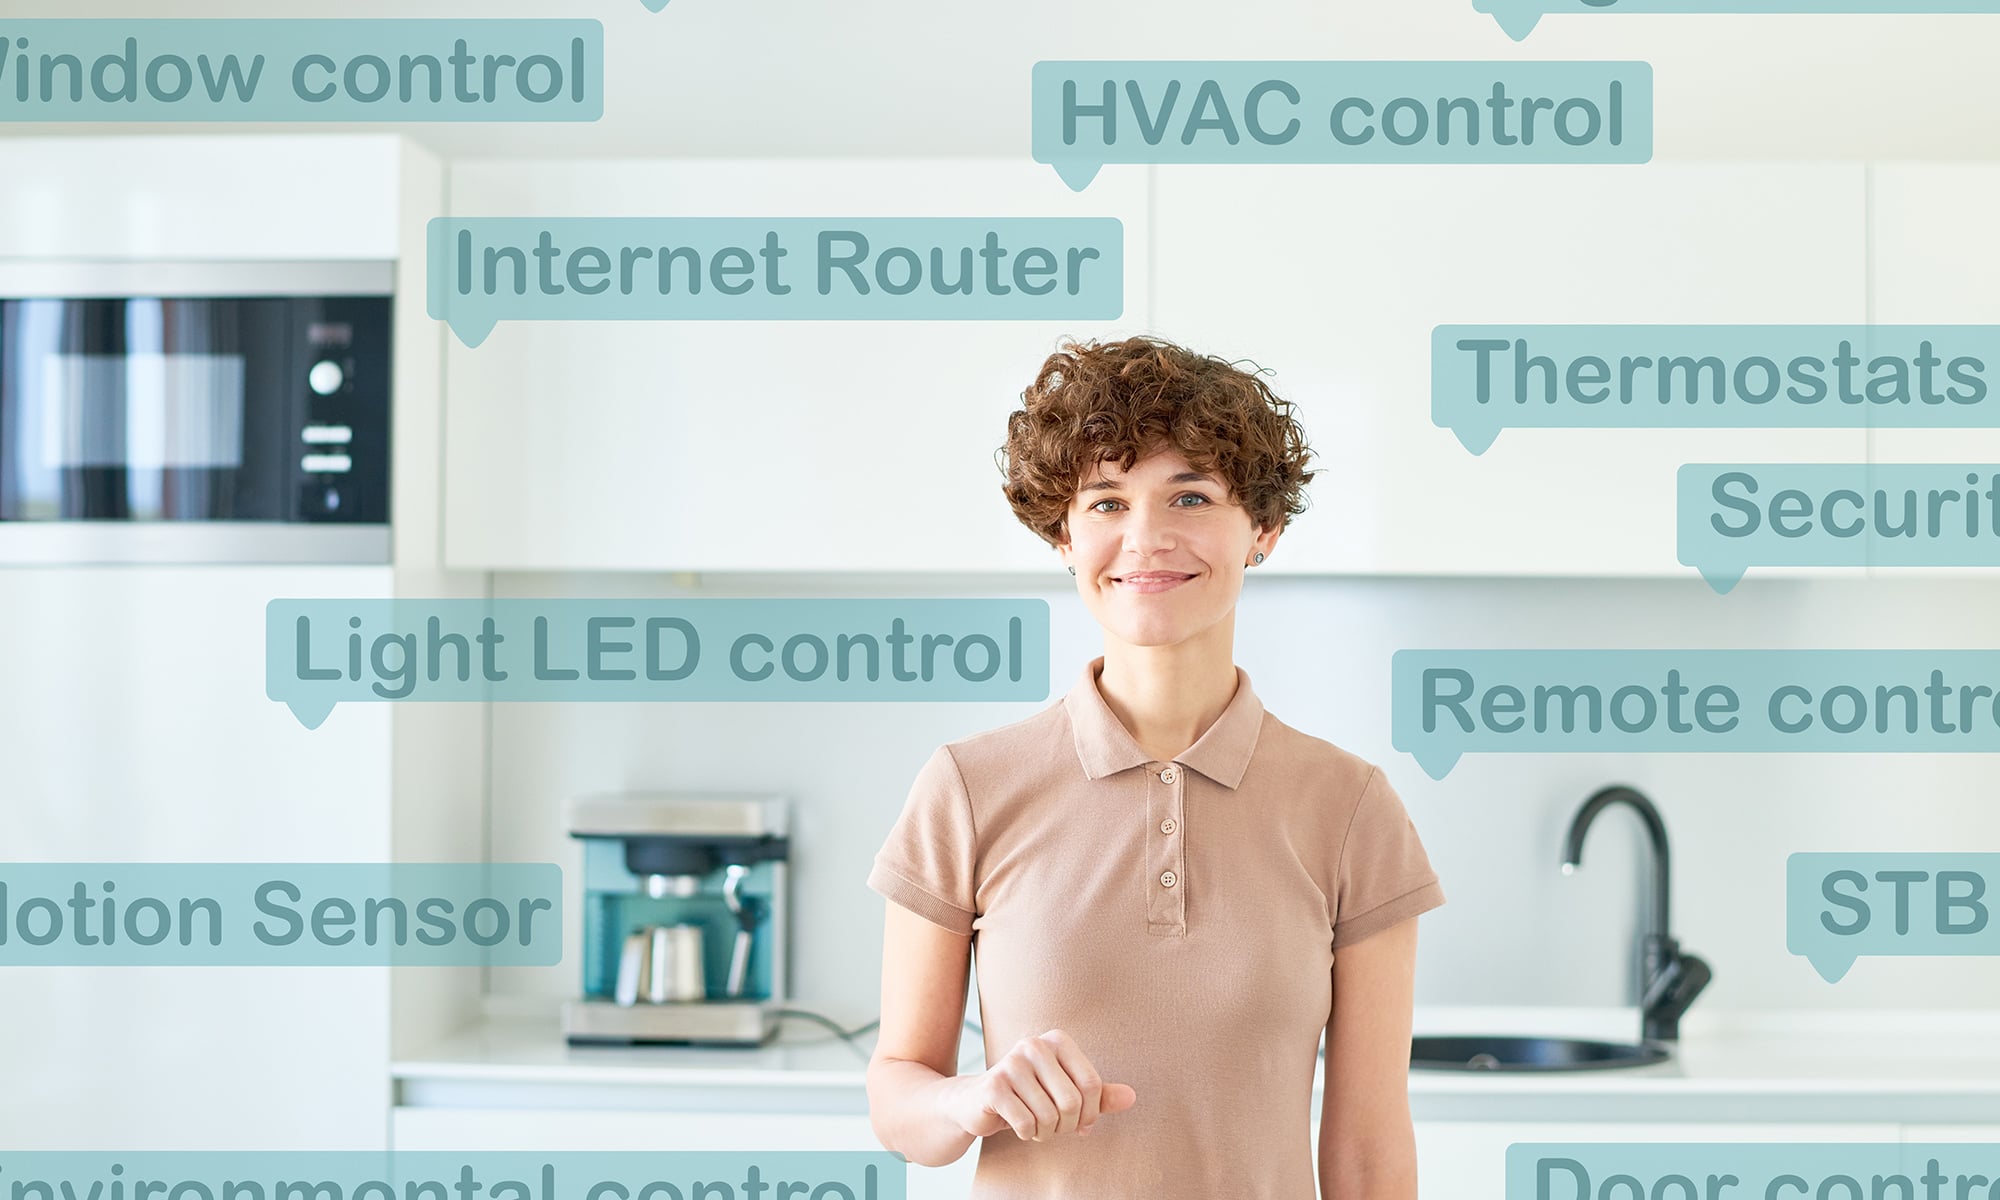 semi-house-automation Why it’s best to talk to a Pro Install AV technician initially to clarify your Home Automation plans